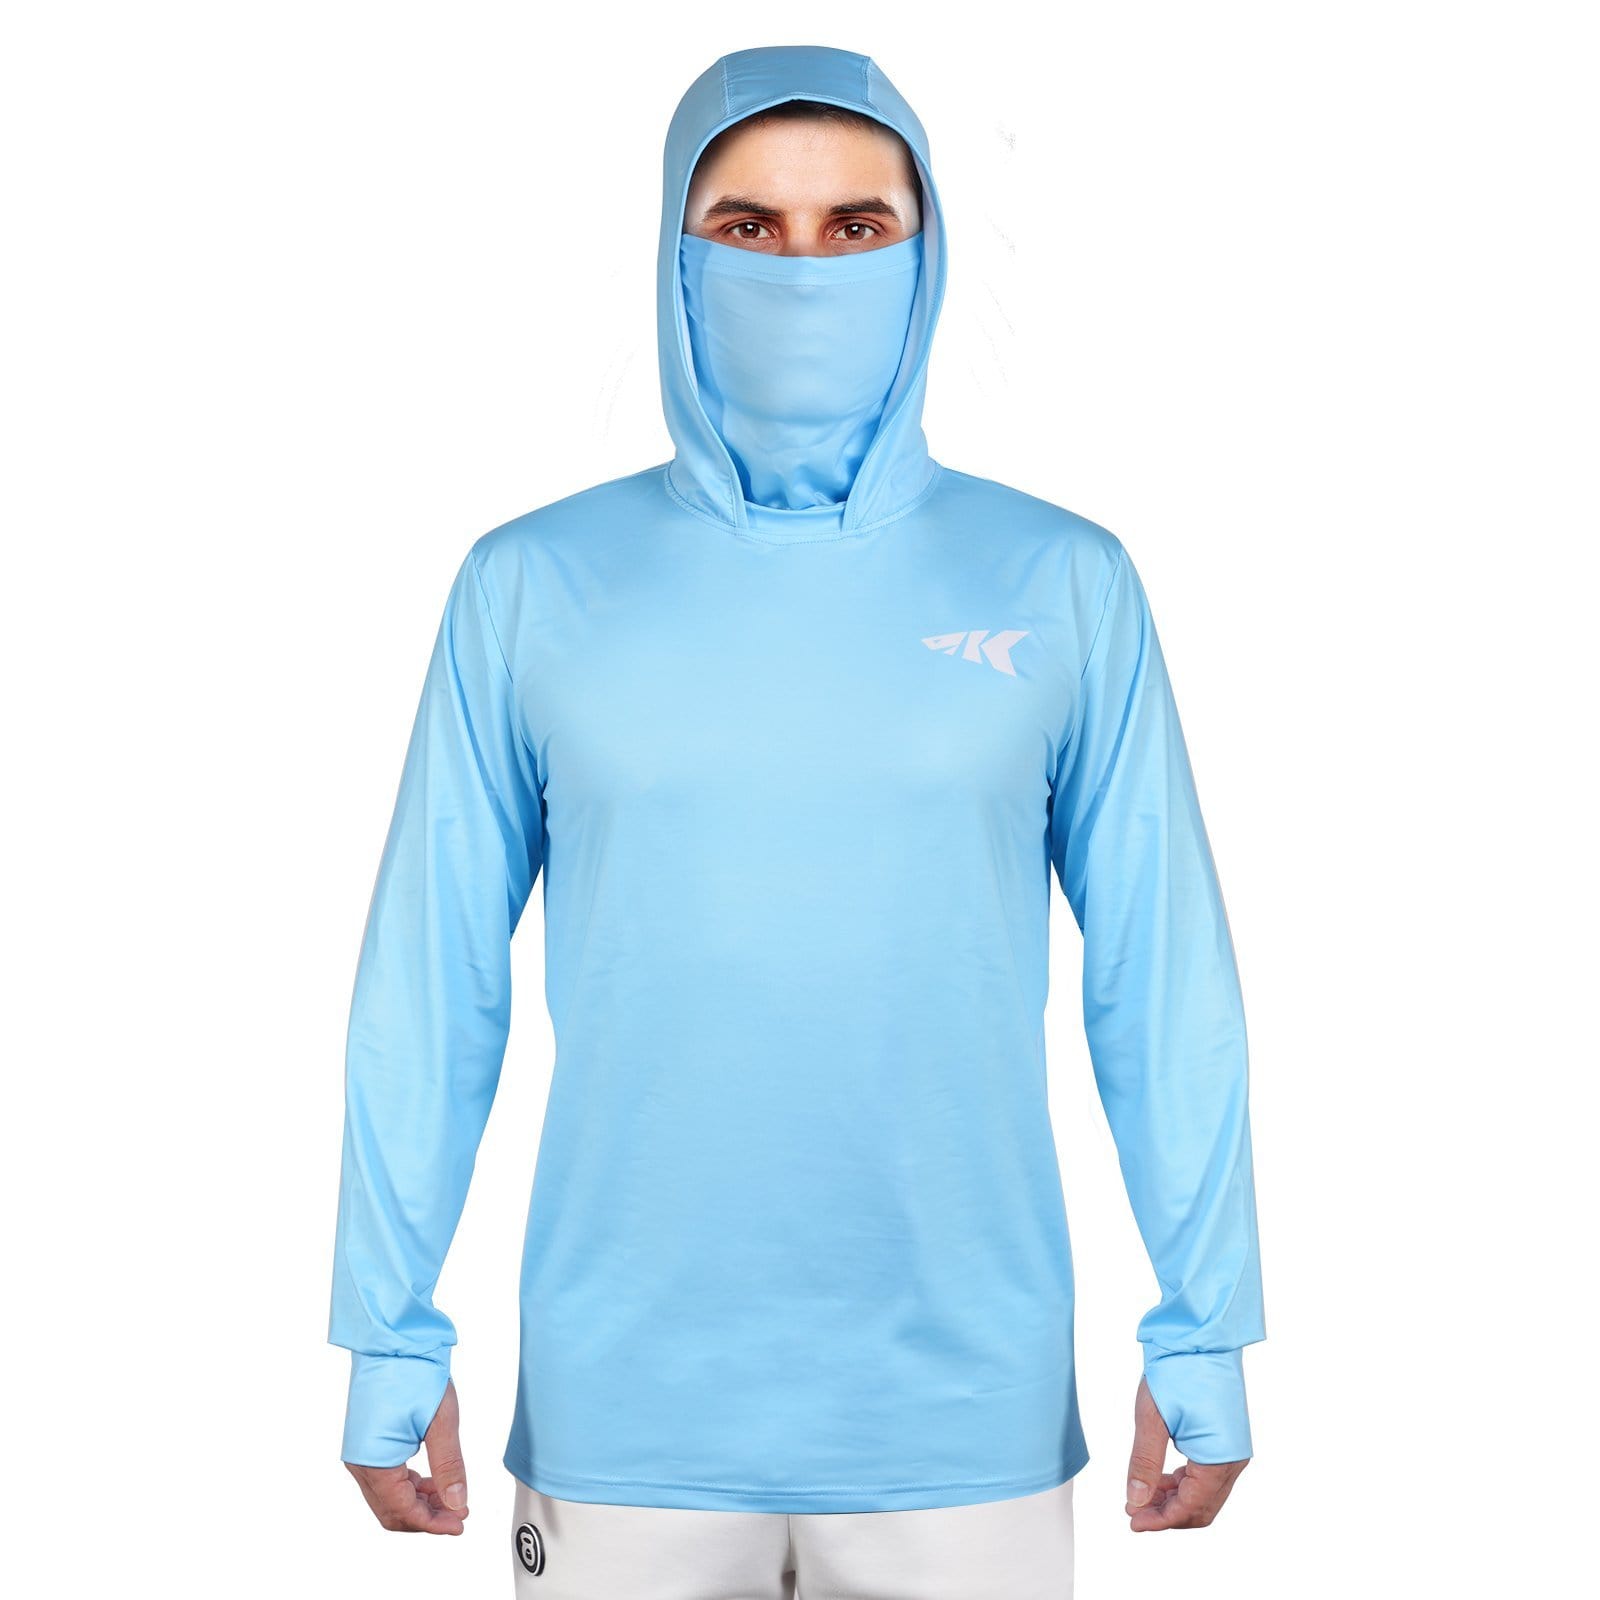 Men’s UPF 50 High Performance Fishing Shirt Cooling Hoodie Camo Long Sleeve Shirt With Mask UV Protection Neck Gaiter Hoodie